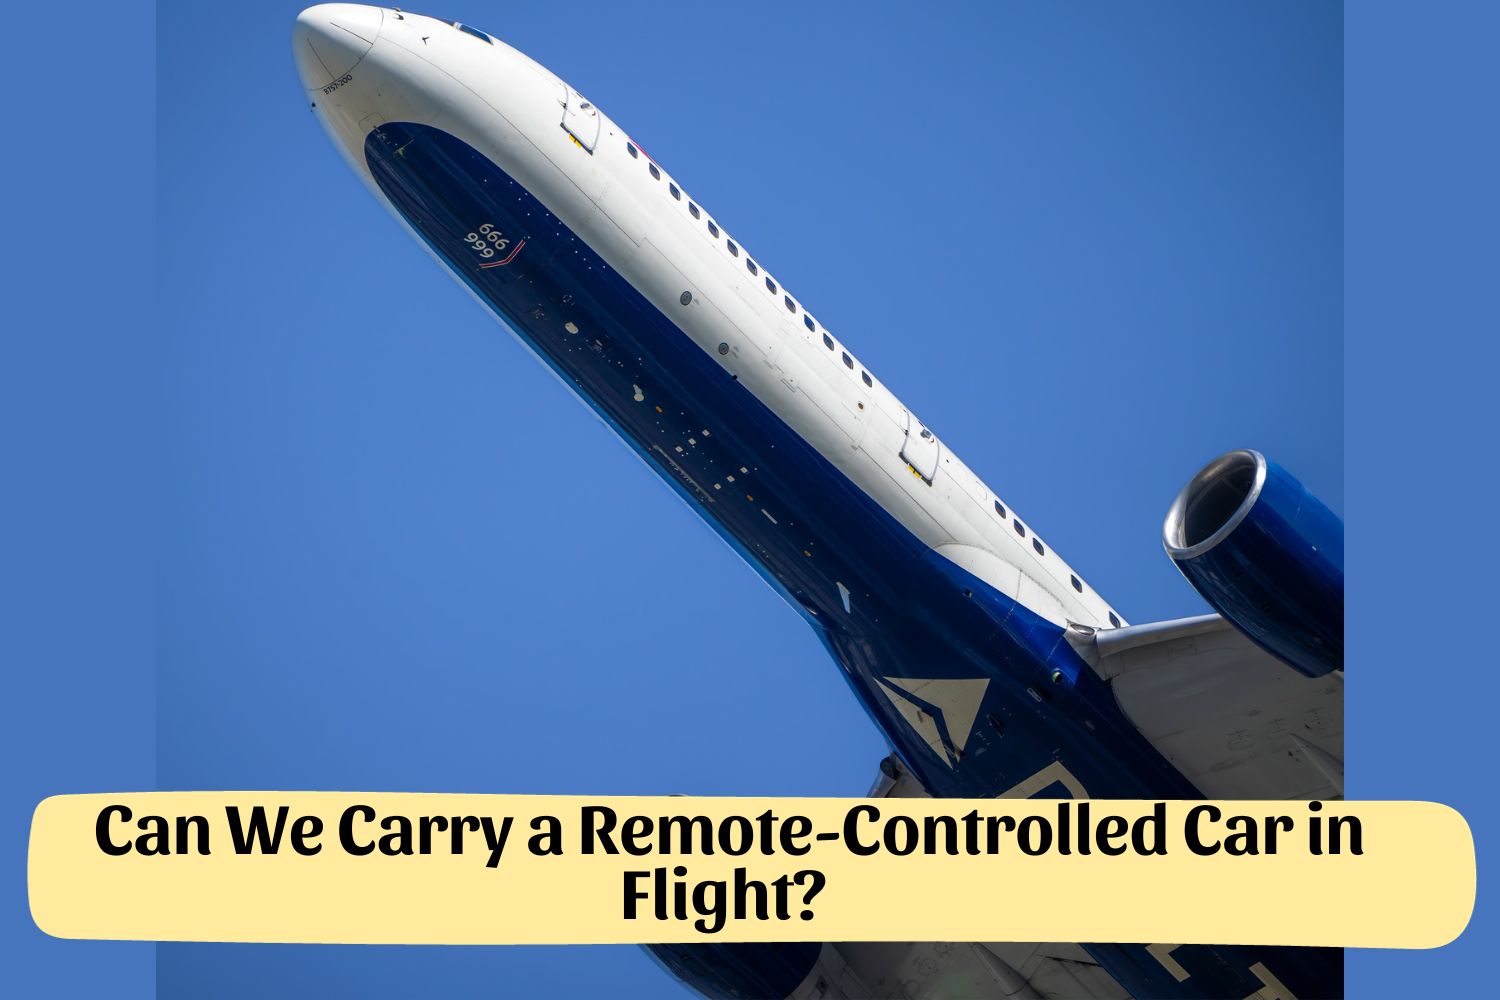 Can We Carry a Remote-Controlled Car in Flight?